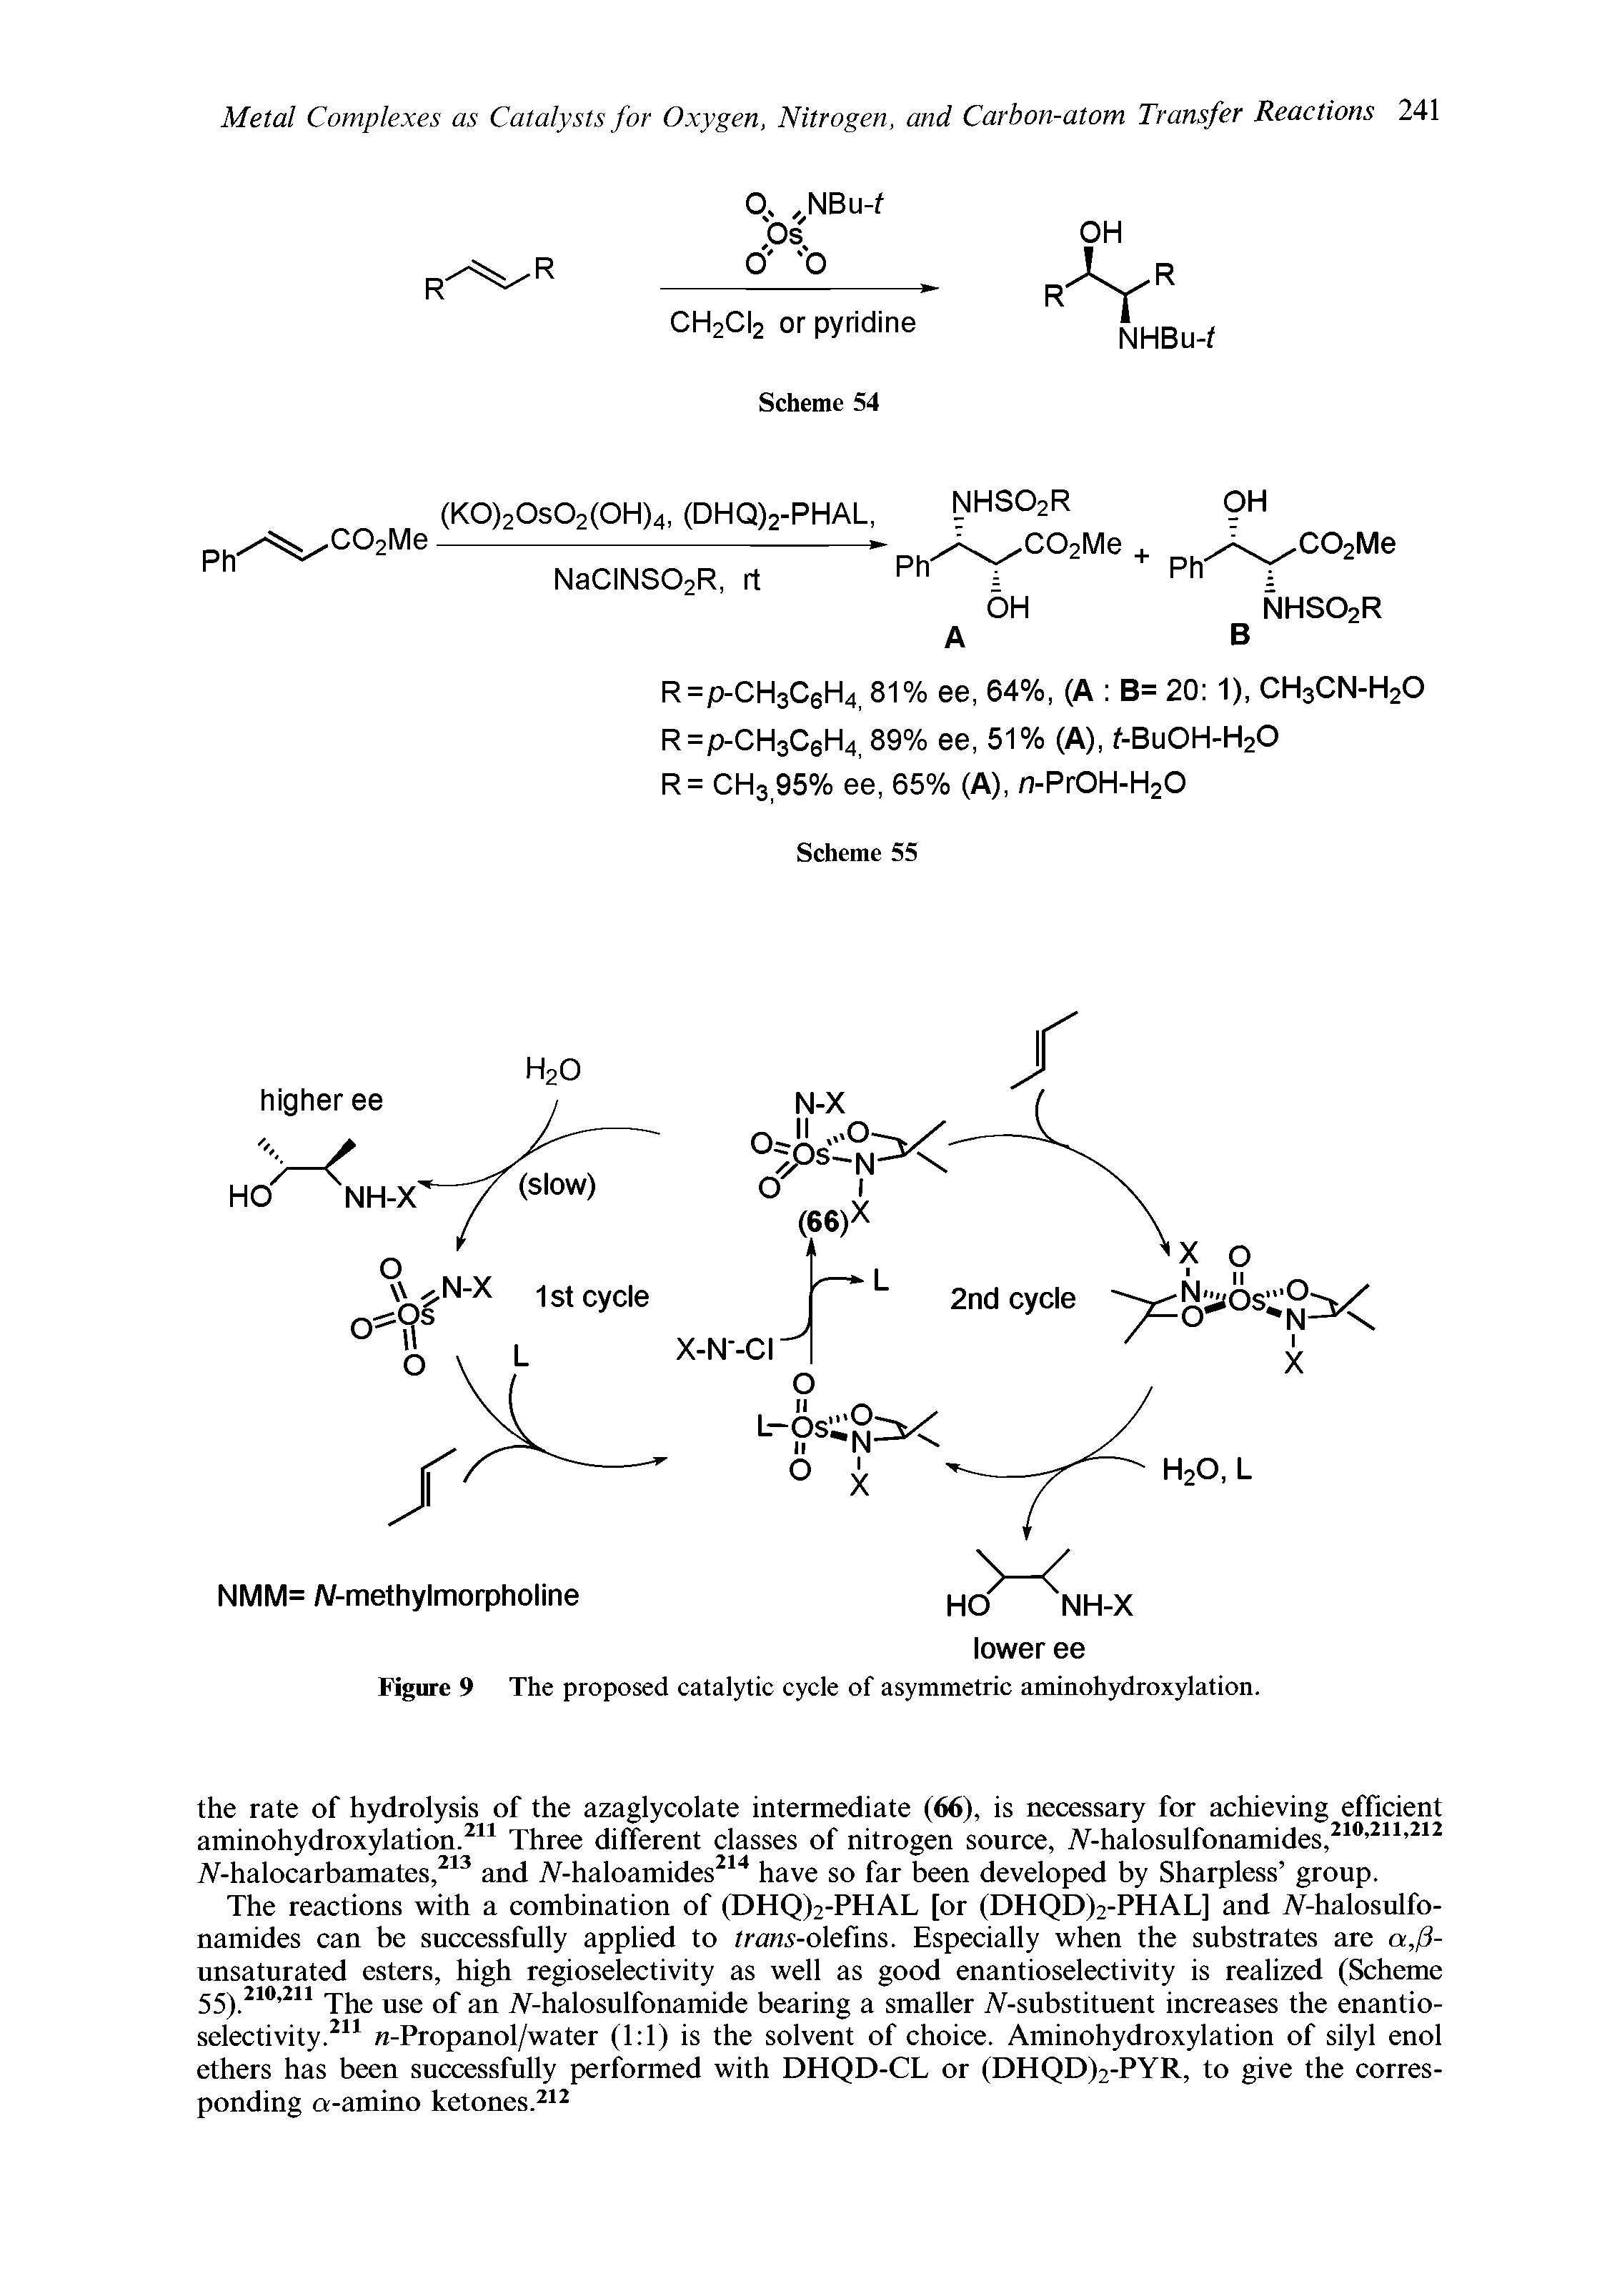 Figure 9 The proposed catalytic cycle of asymmetric aminohydroxylation.